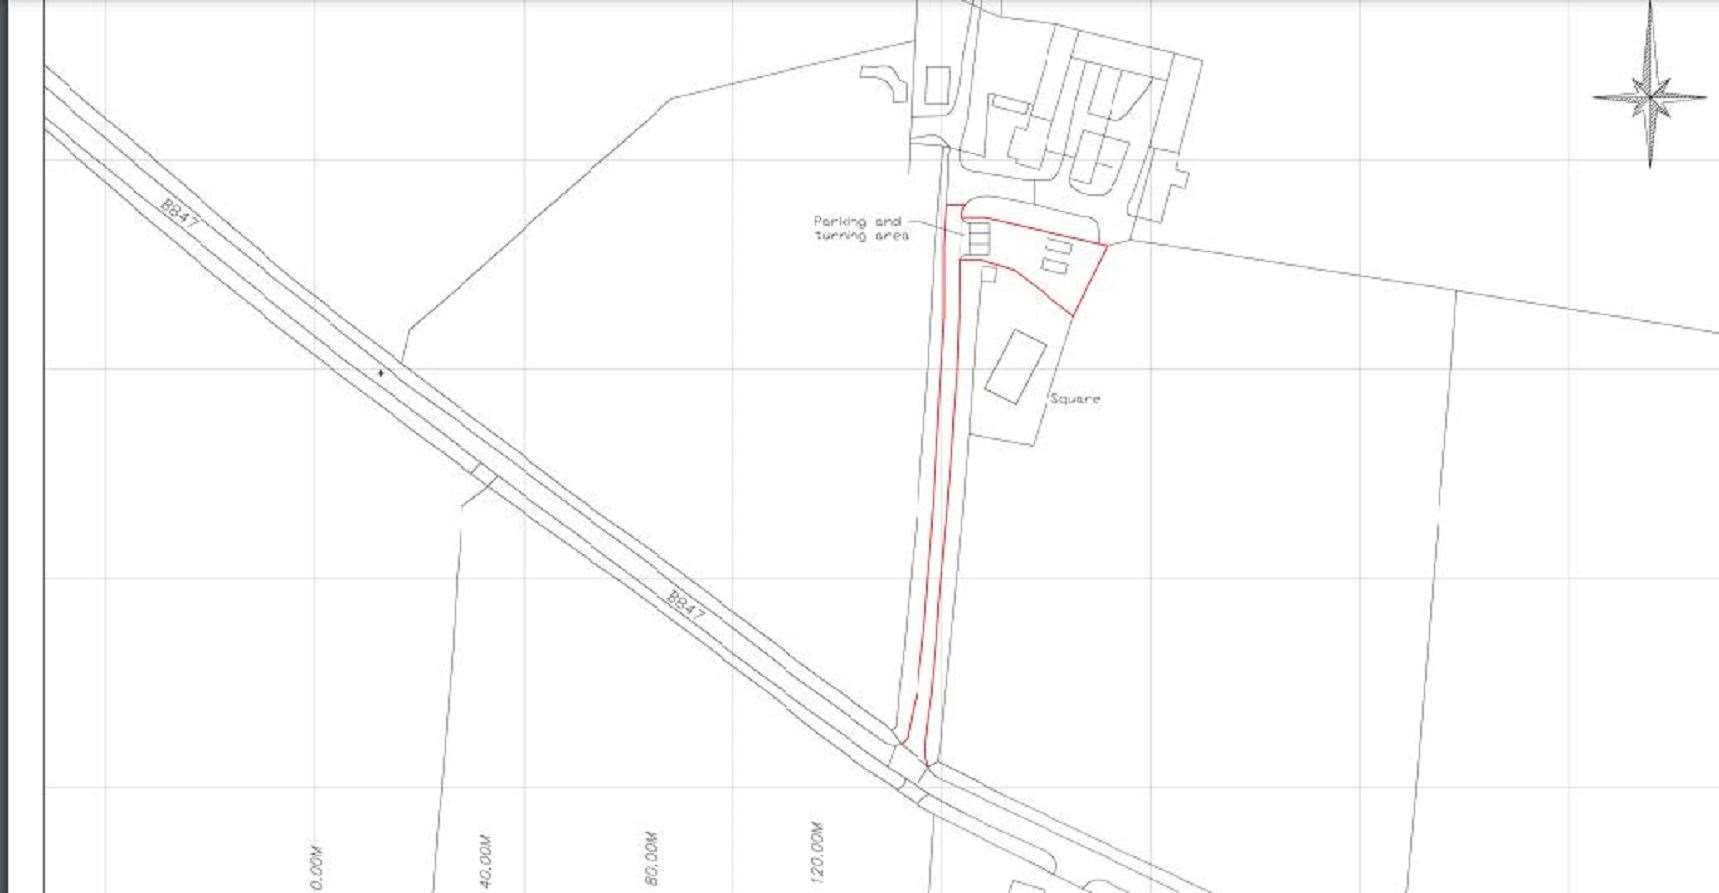 Map of the planned area for the facility.